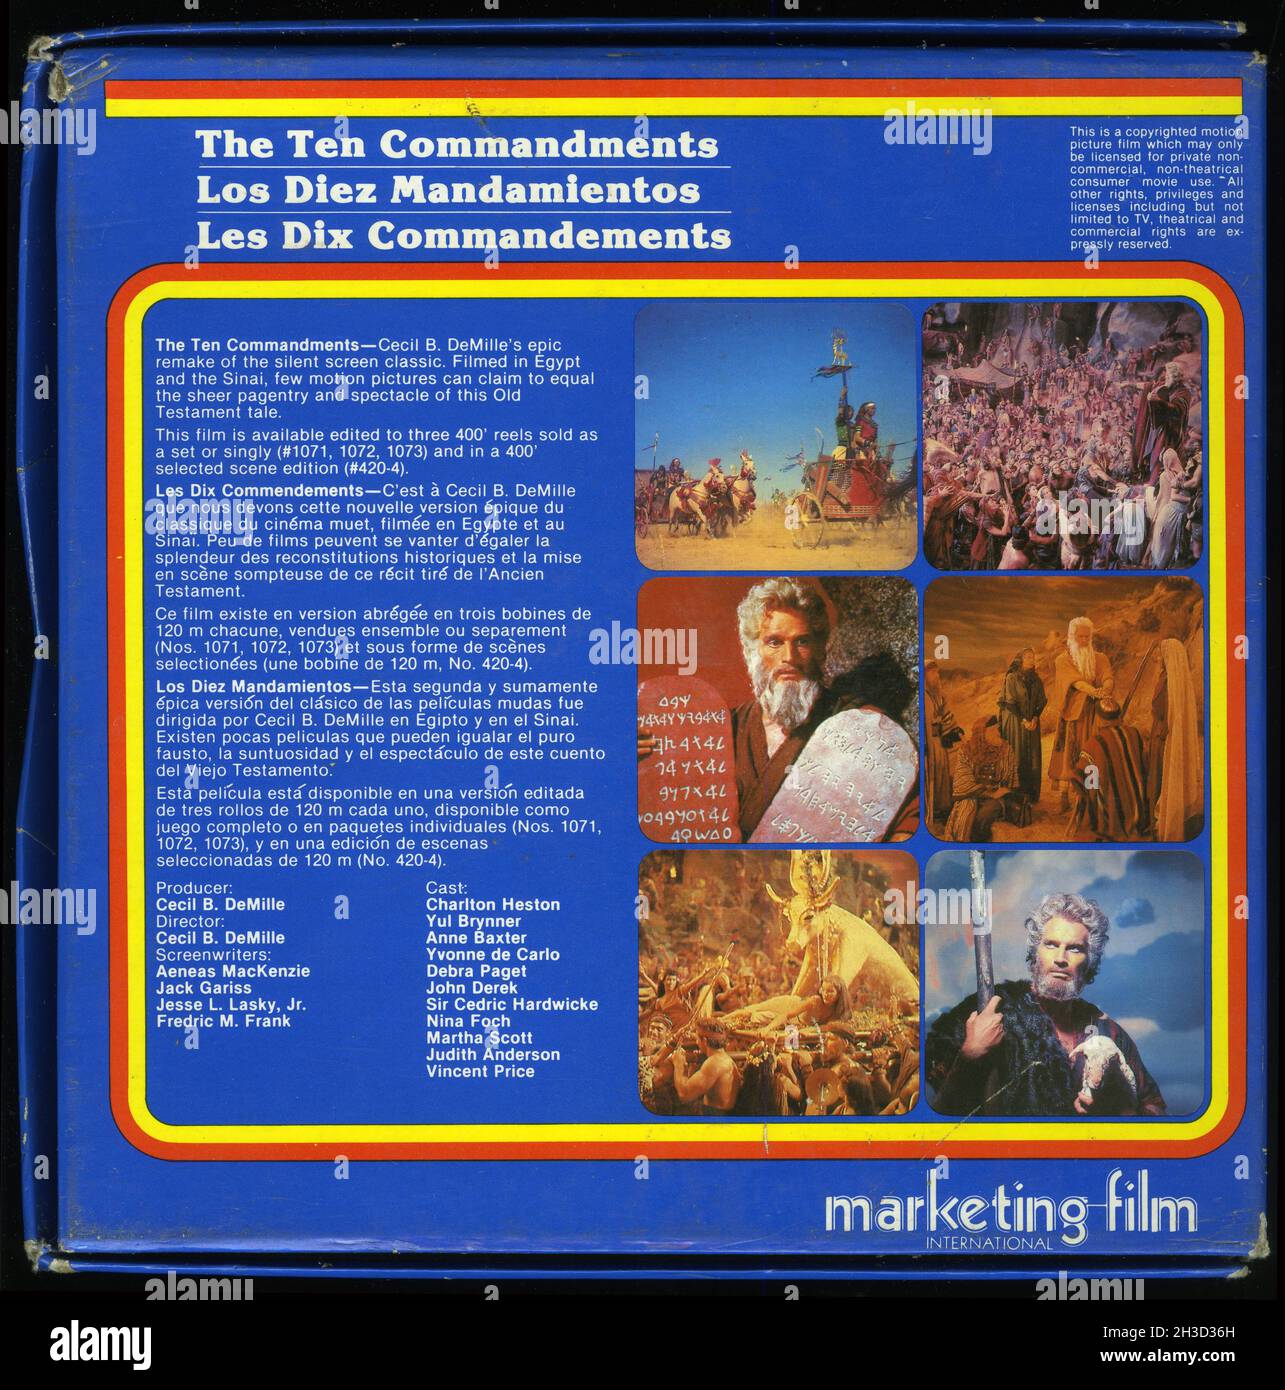 Back cover of a Super 8 fillm of the 1956 MGM film The Ten Commandments, starring Charlton Heston and Yul Brynner. Stock Photo